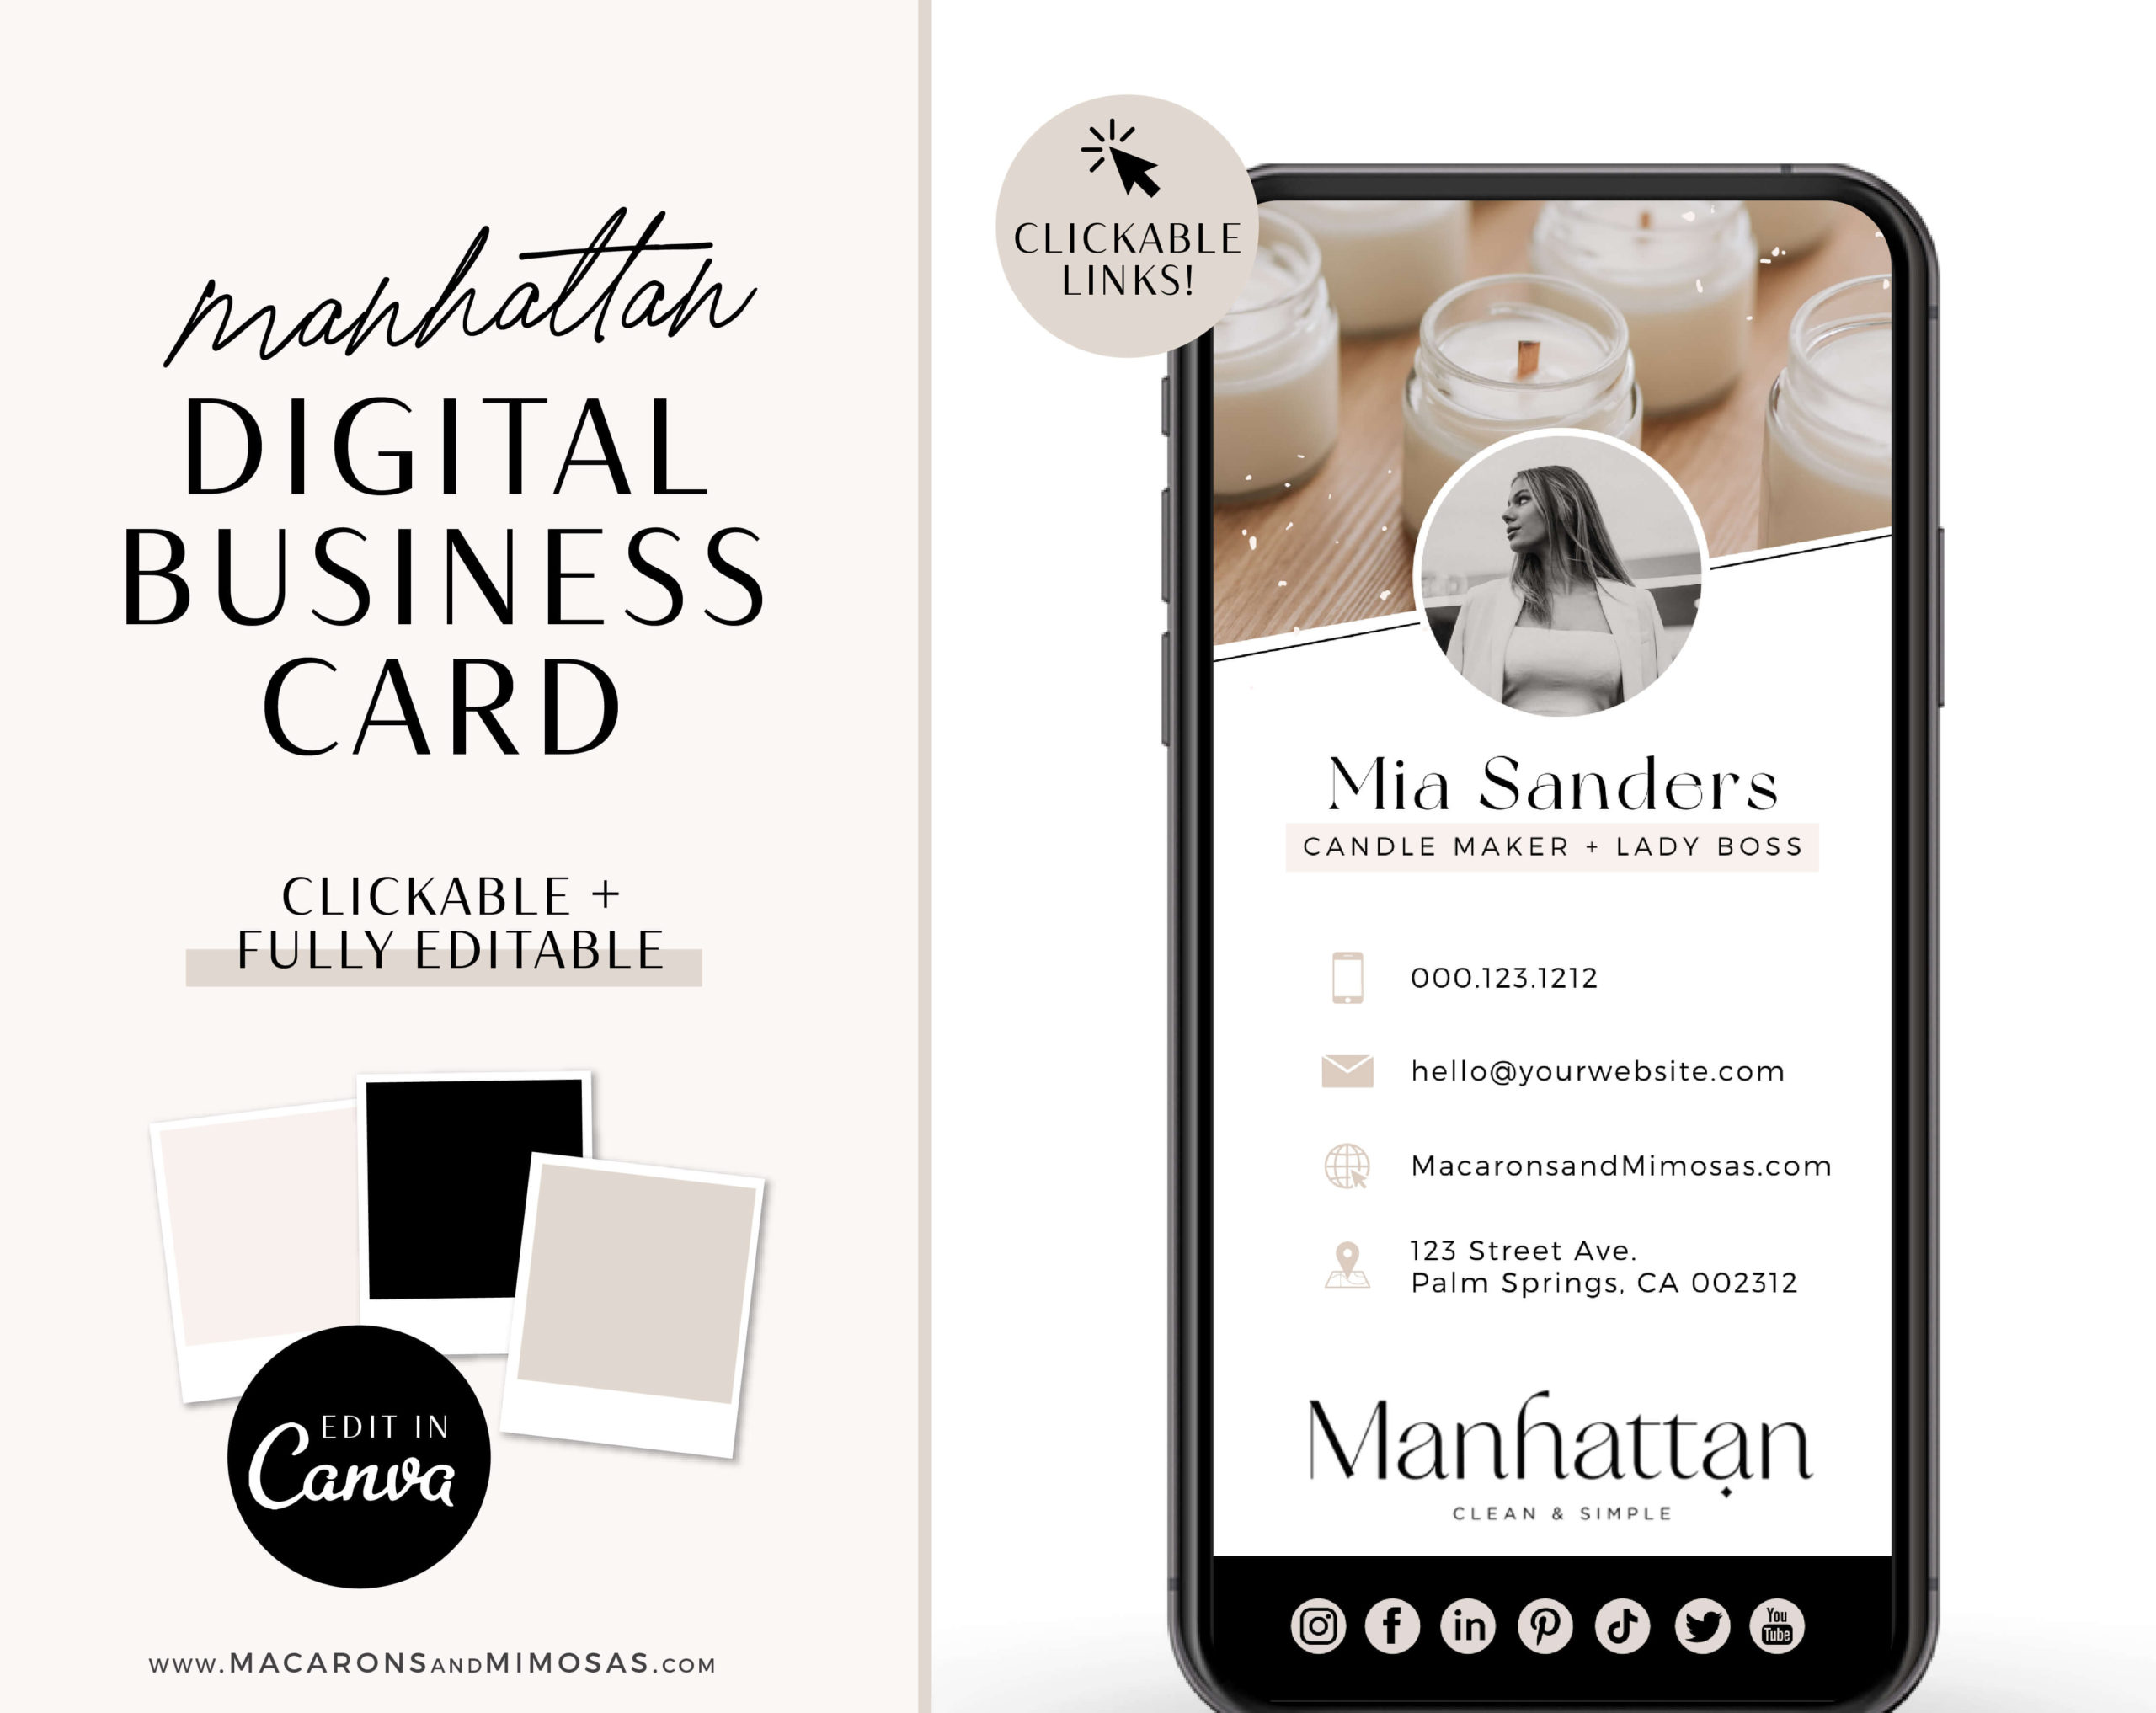 Candle business digital business card editable in Canva with clickable links, How to create Modern Minimalist Blush Digital Business Card